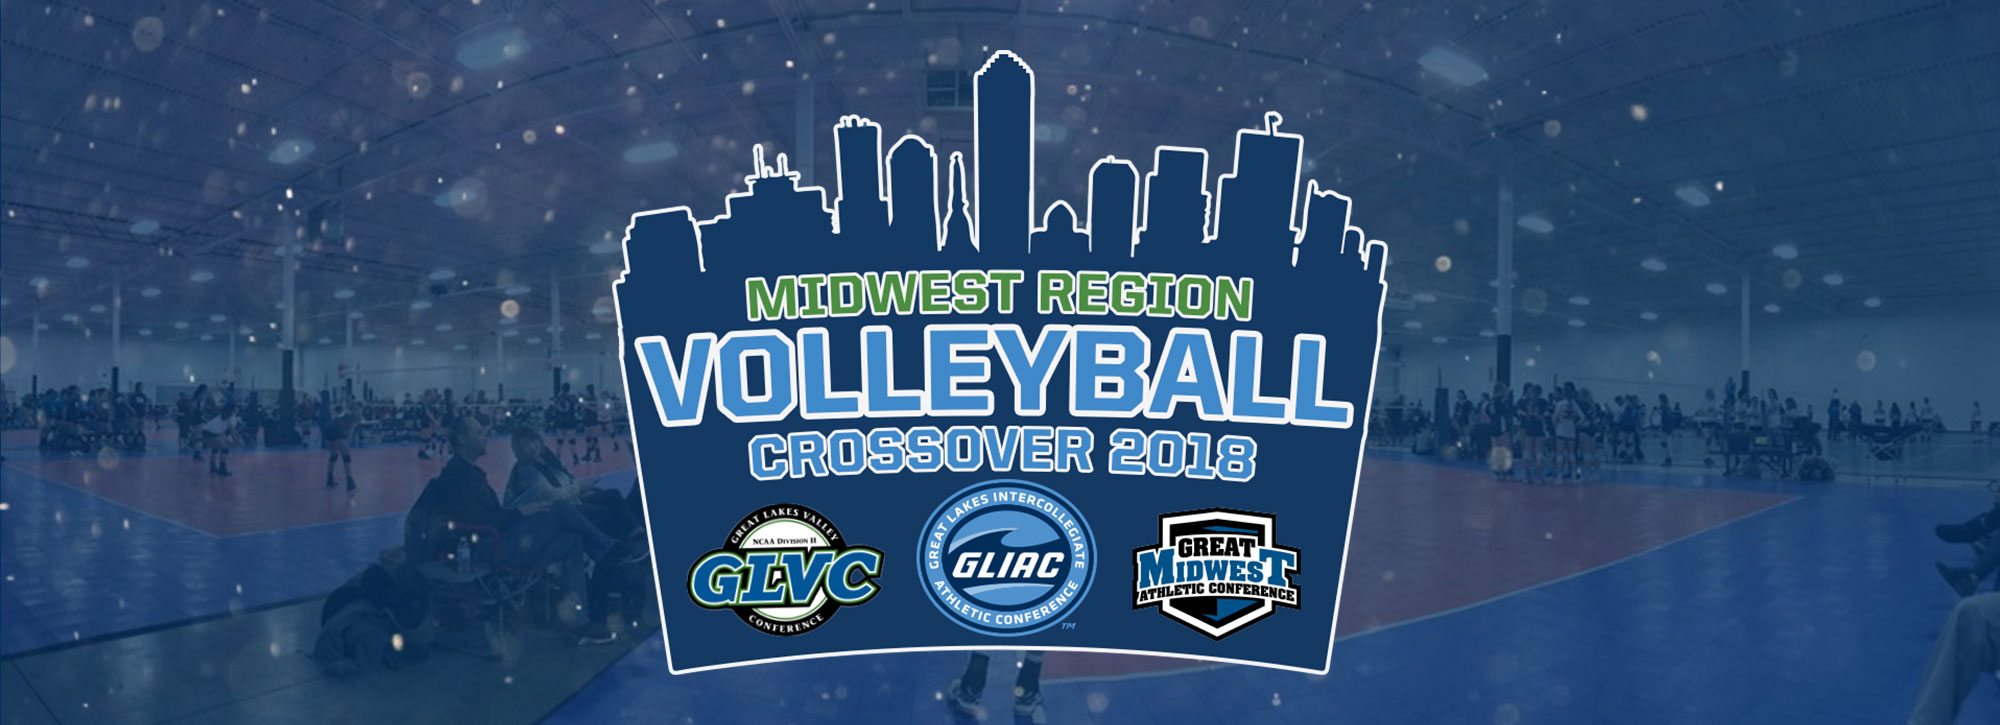 Northern Michigan Posts 3-0 Record at 2018 Midwest Region Volleyball Crossover; All-Tournament Team Announced